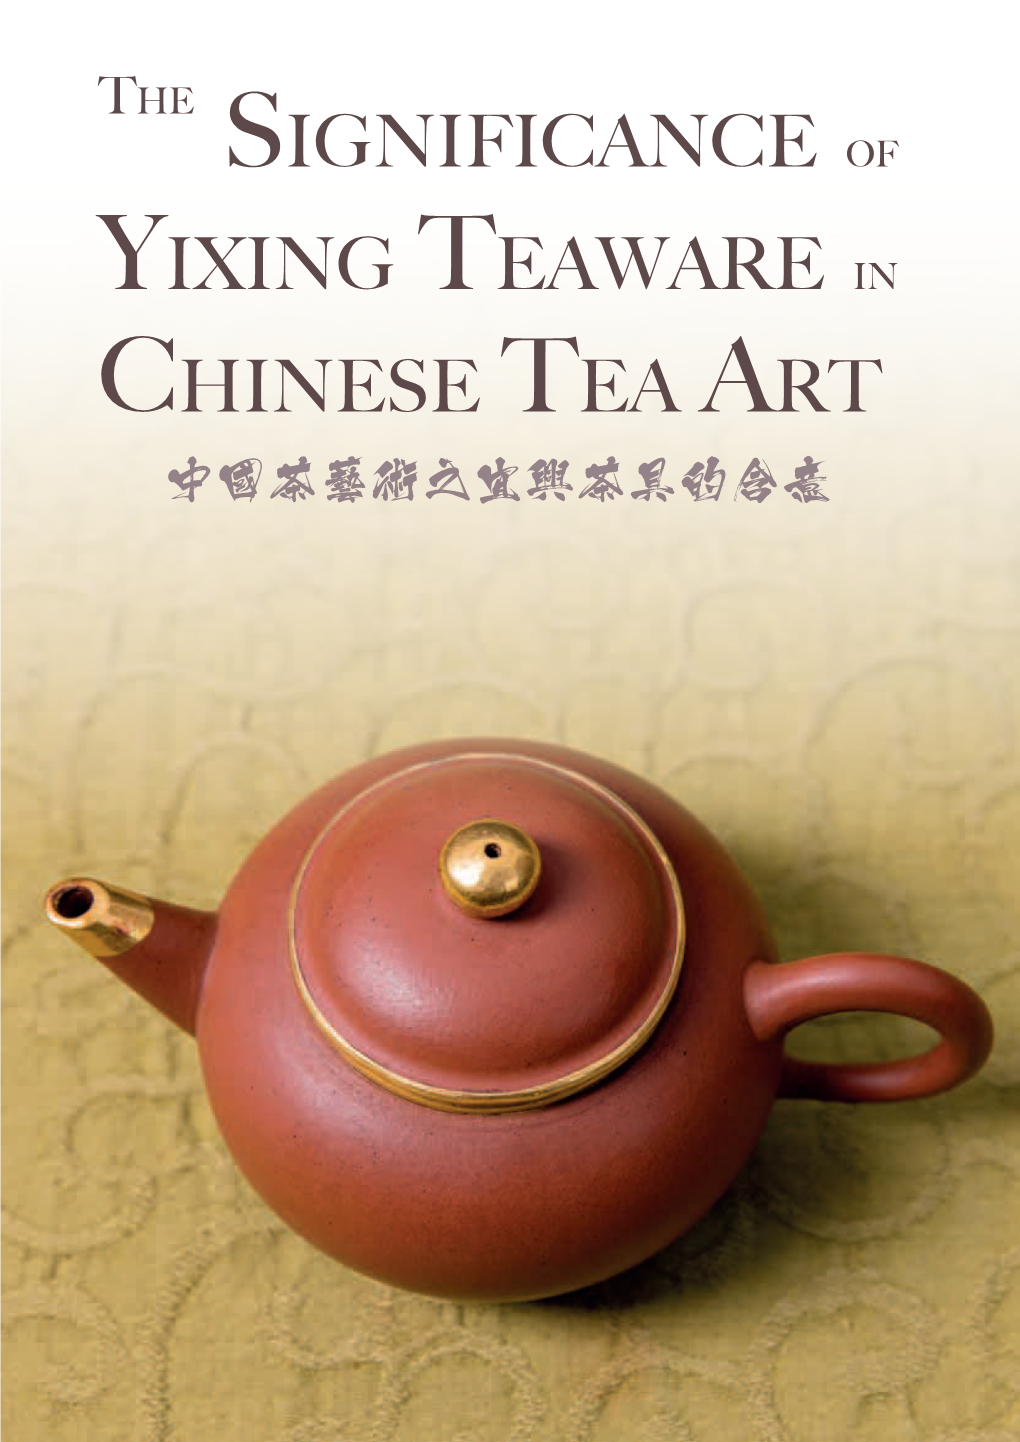 The Significance of Yixing Teaware in Chinese Tea Art the Emperor and the Teapot